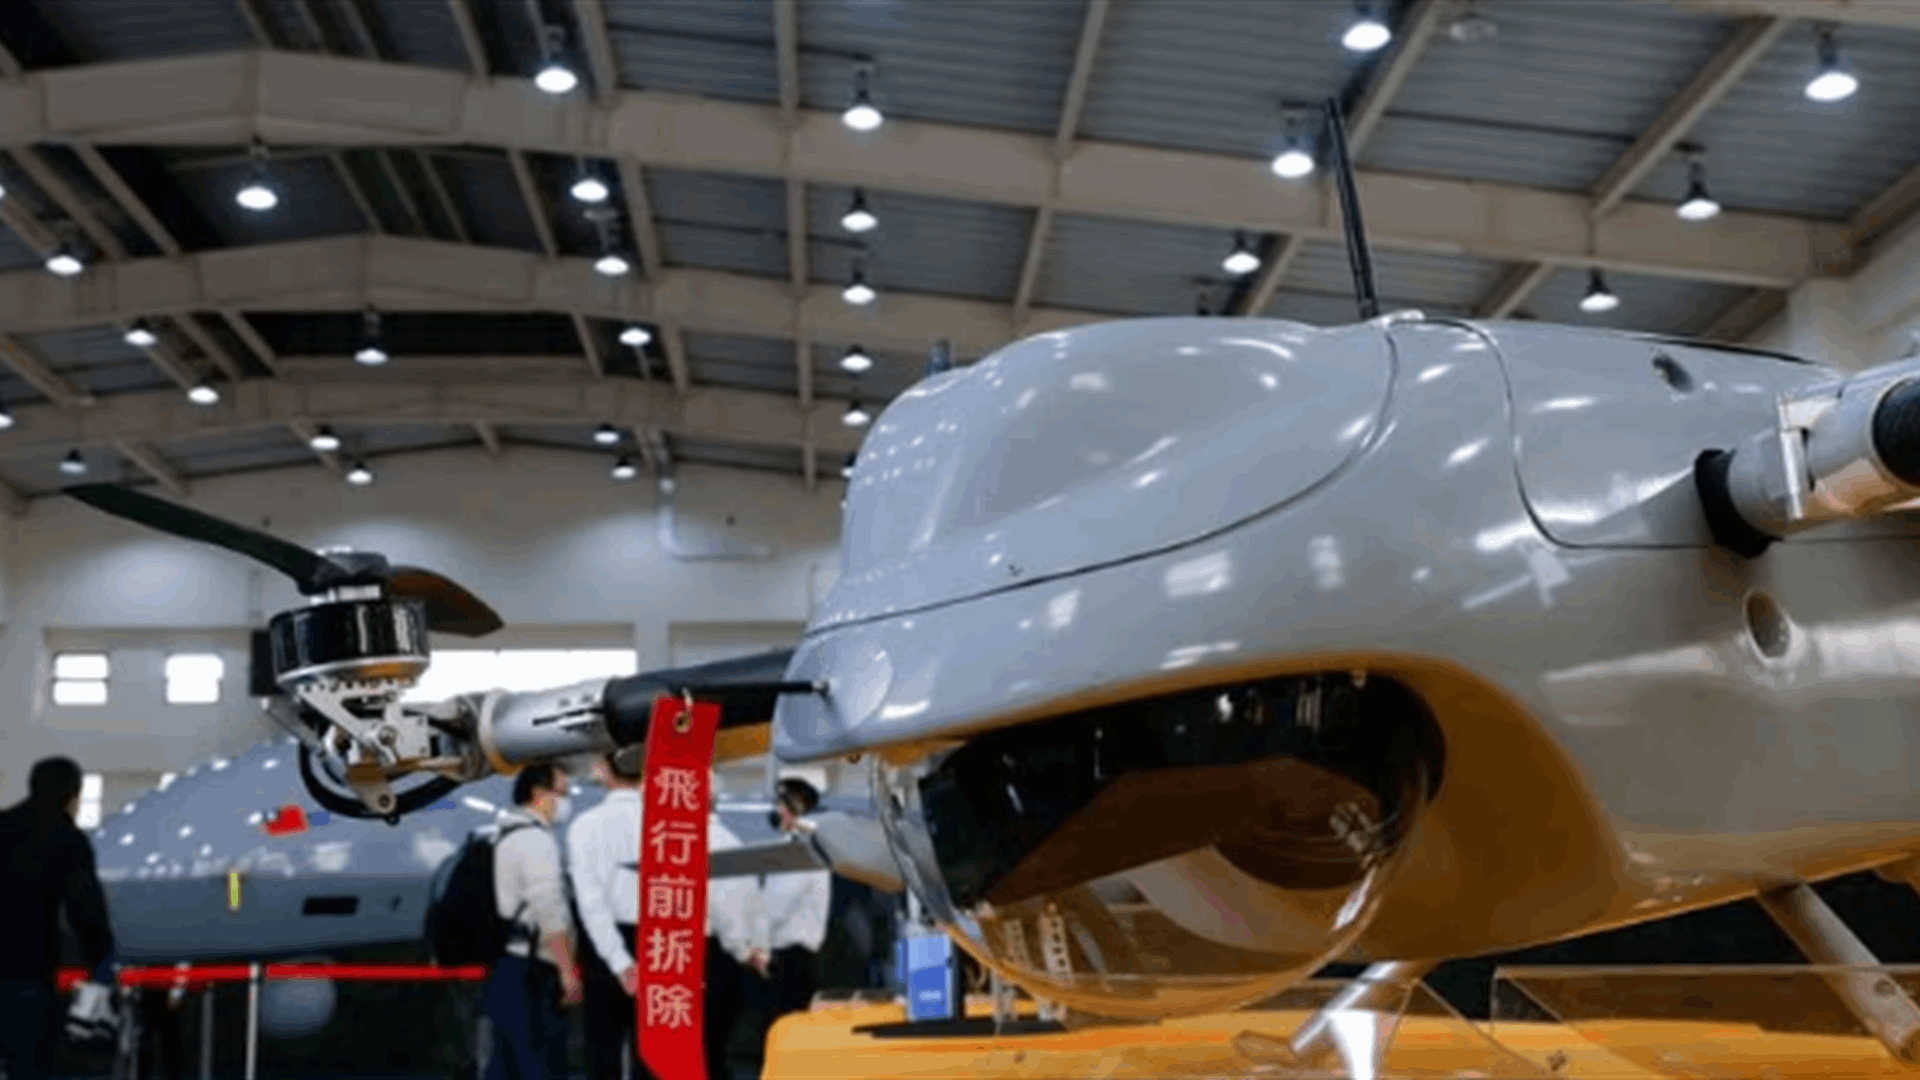 Learning from Ukraine, Taiwan shows off its drones as key to &#39;asymmetric warfare&#39;